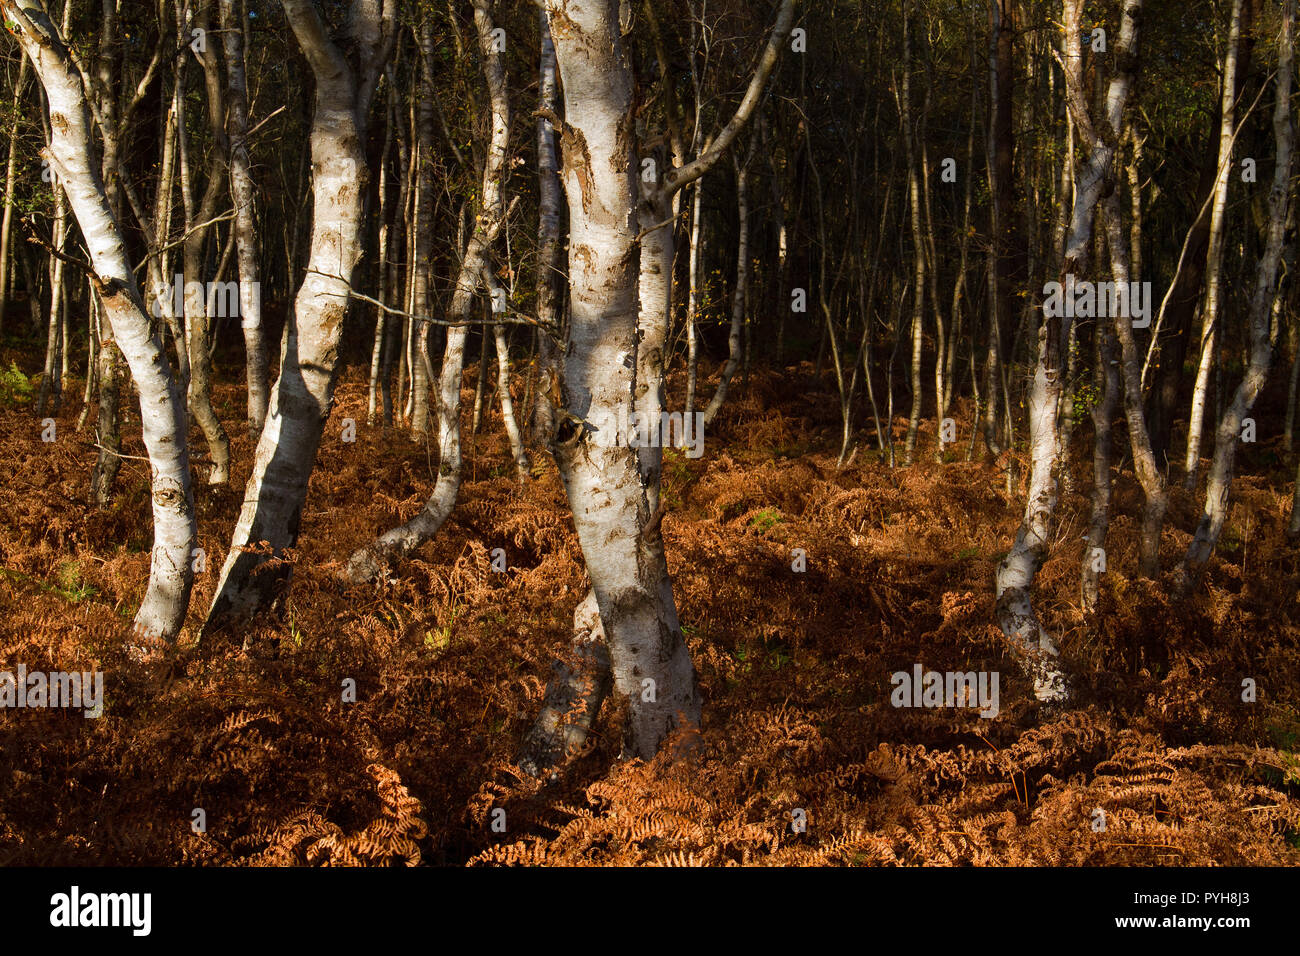 Birch forest with undergrowth of Buckler ferns in autumn, the white bark contrasting with the brown, dry ferns Stock Photo